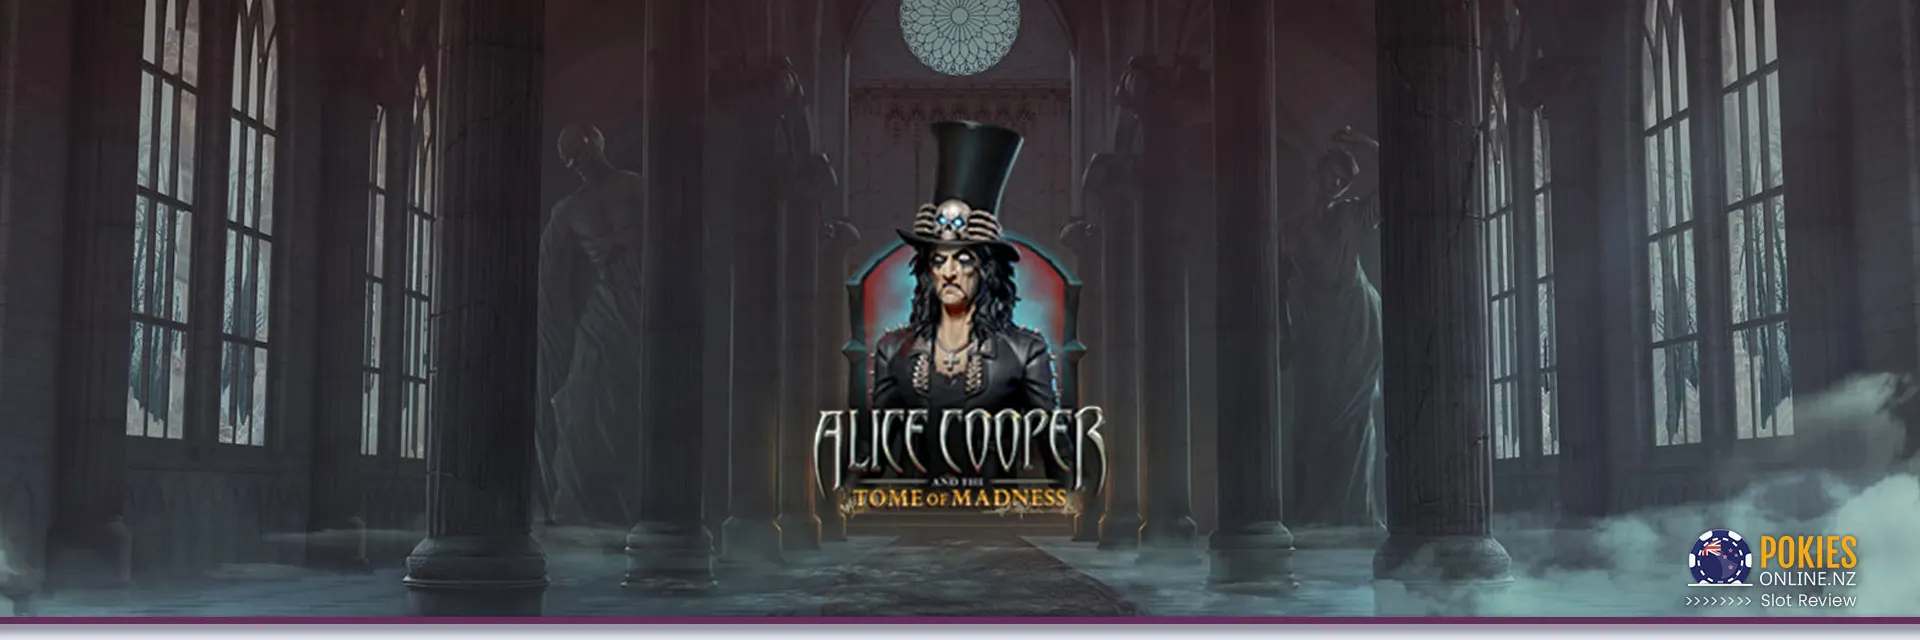 Alice Cooper and the tomb of madness slot banner